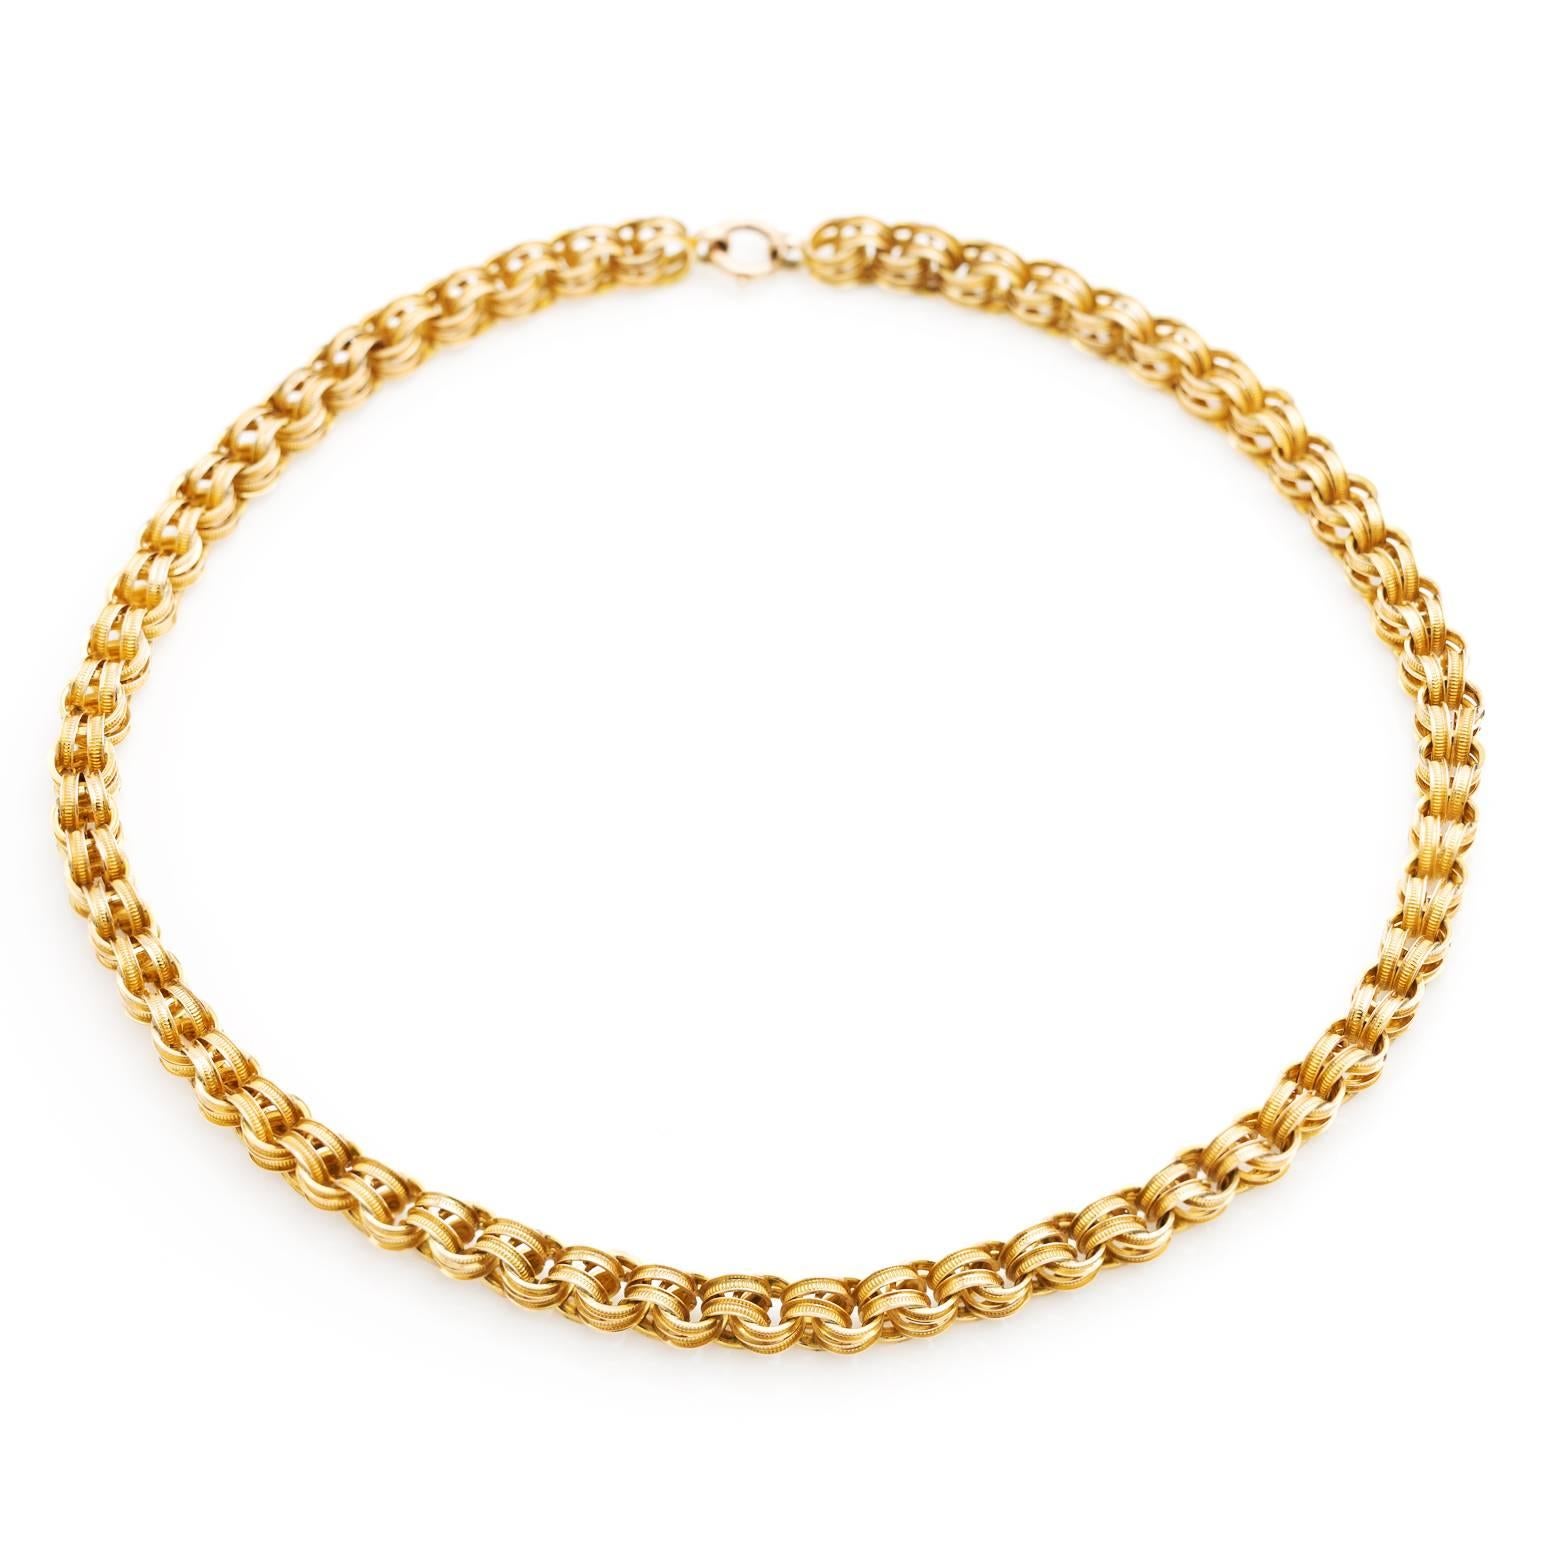 This substantial and shiny double link gold chain has intricate detail that adds extra shine and it's from the 1880's. Vintage and antique and made to be celebrated! It's in excellent and extravagant condition.